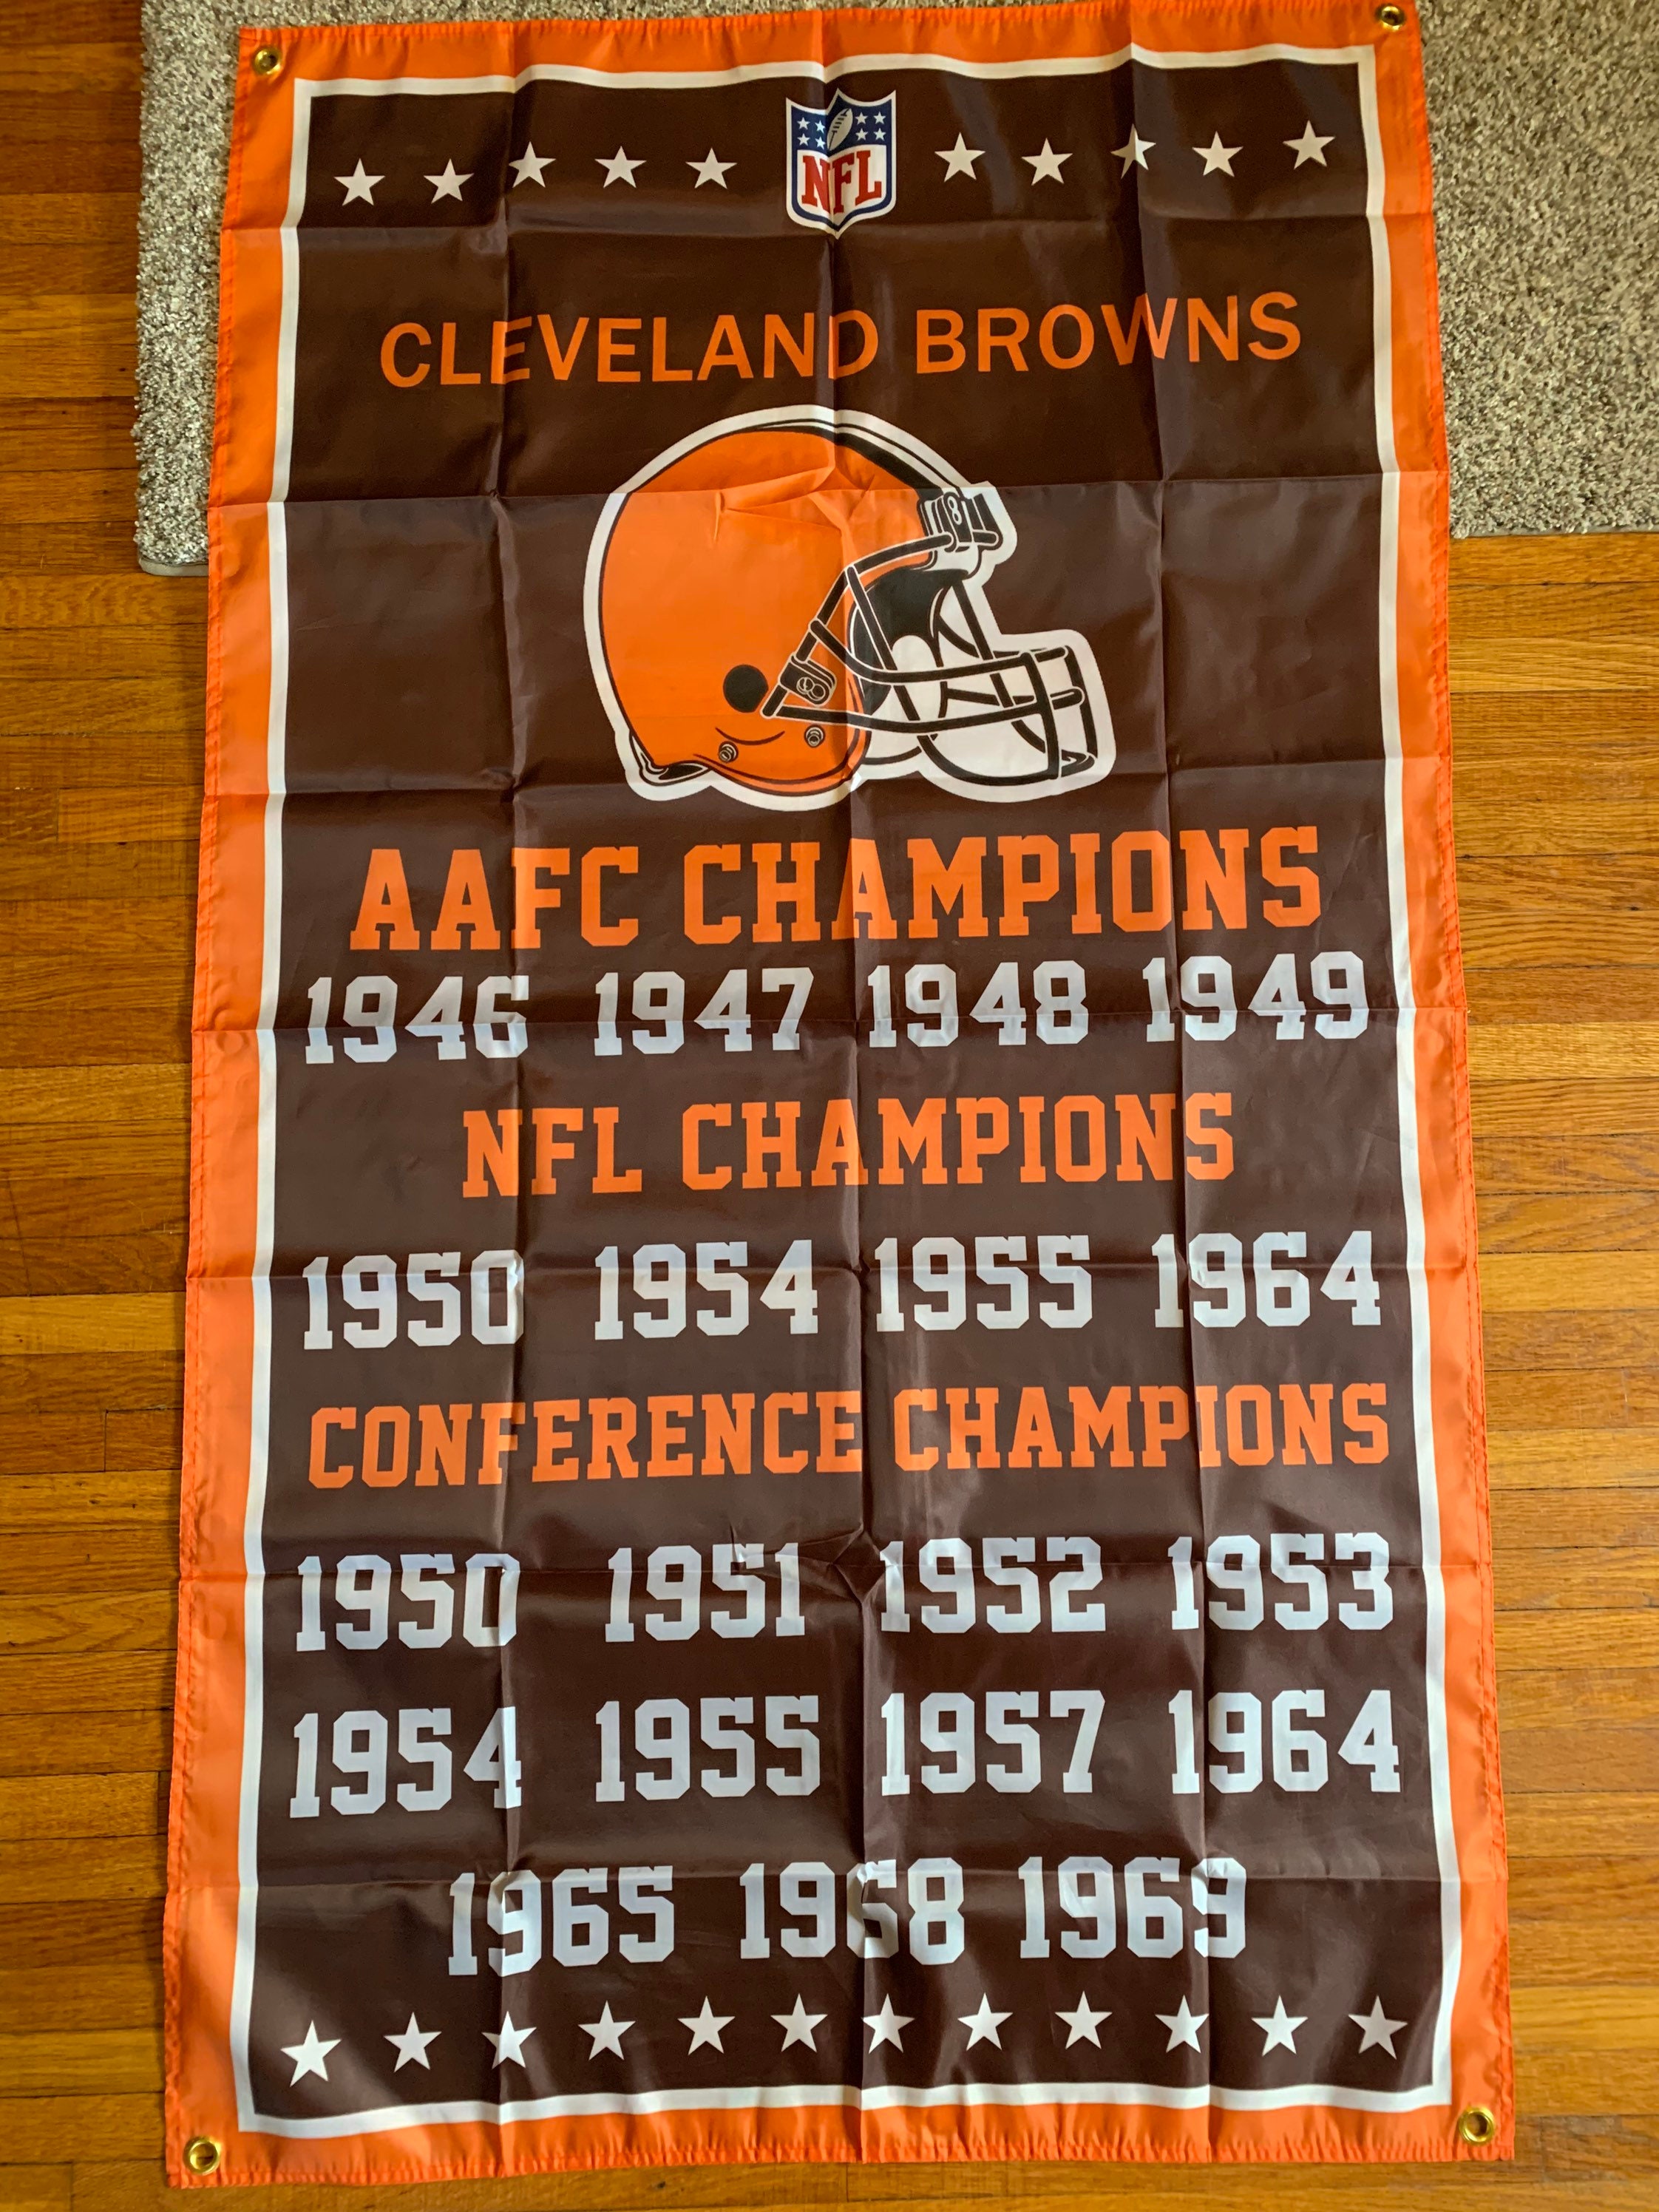 Official Cleveland Browns Accessories, Browns Gifts, Jewelry, Presents